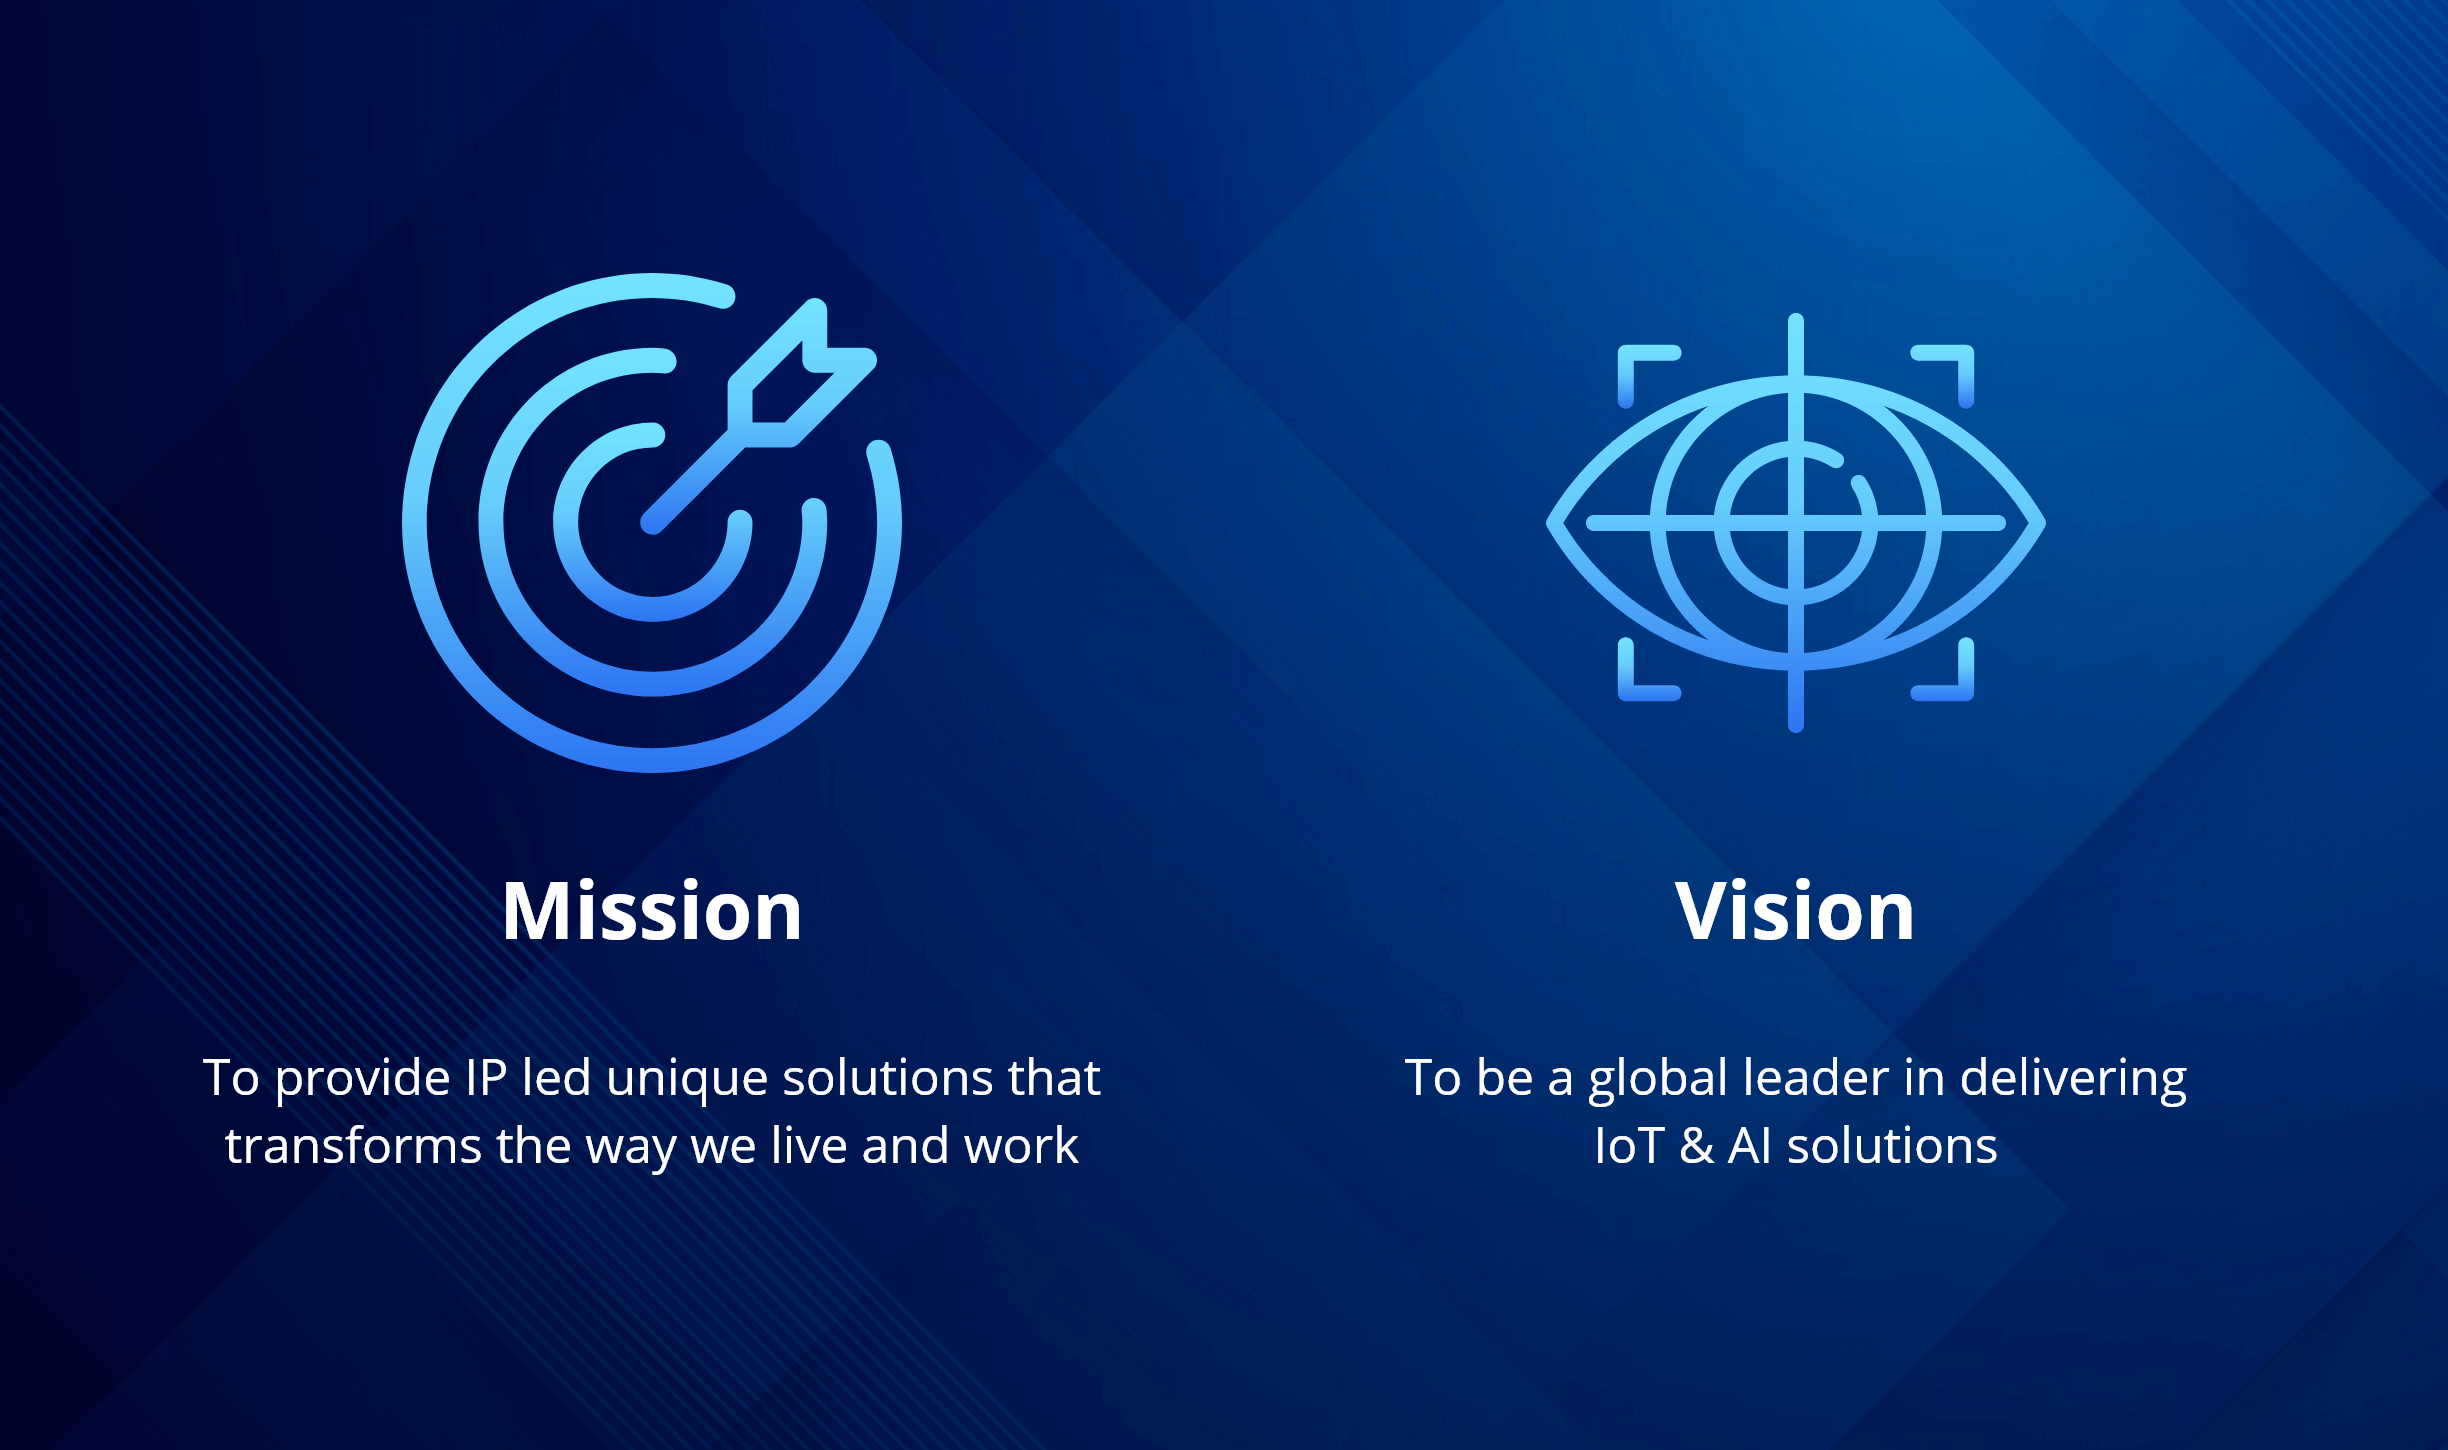 trinity's mission and vision